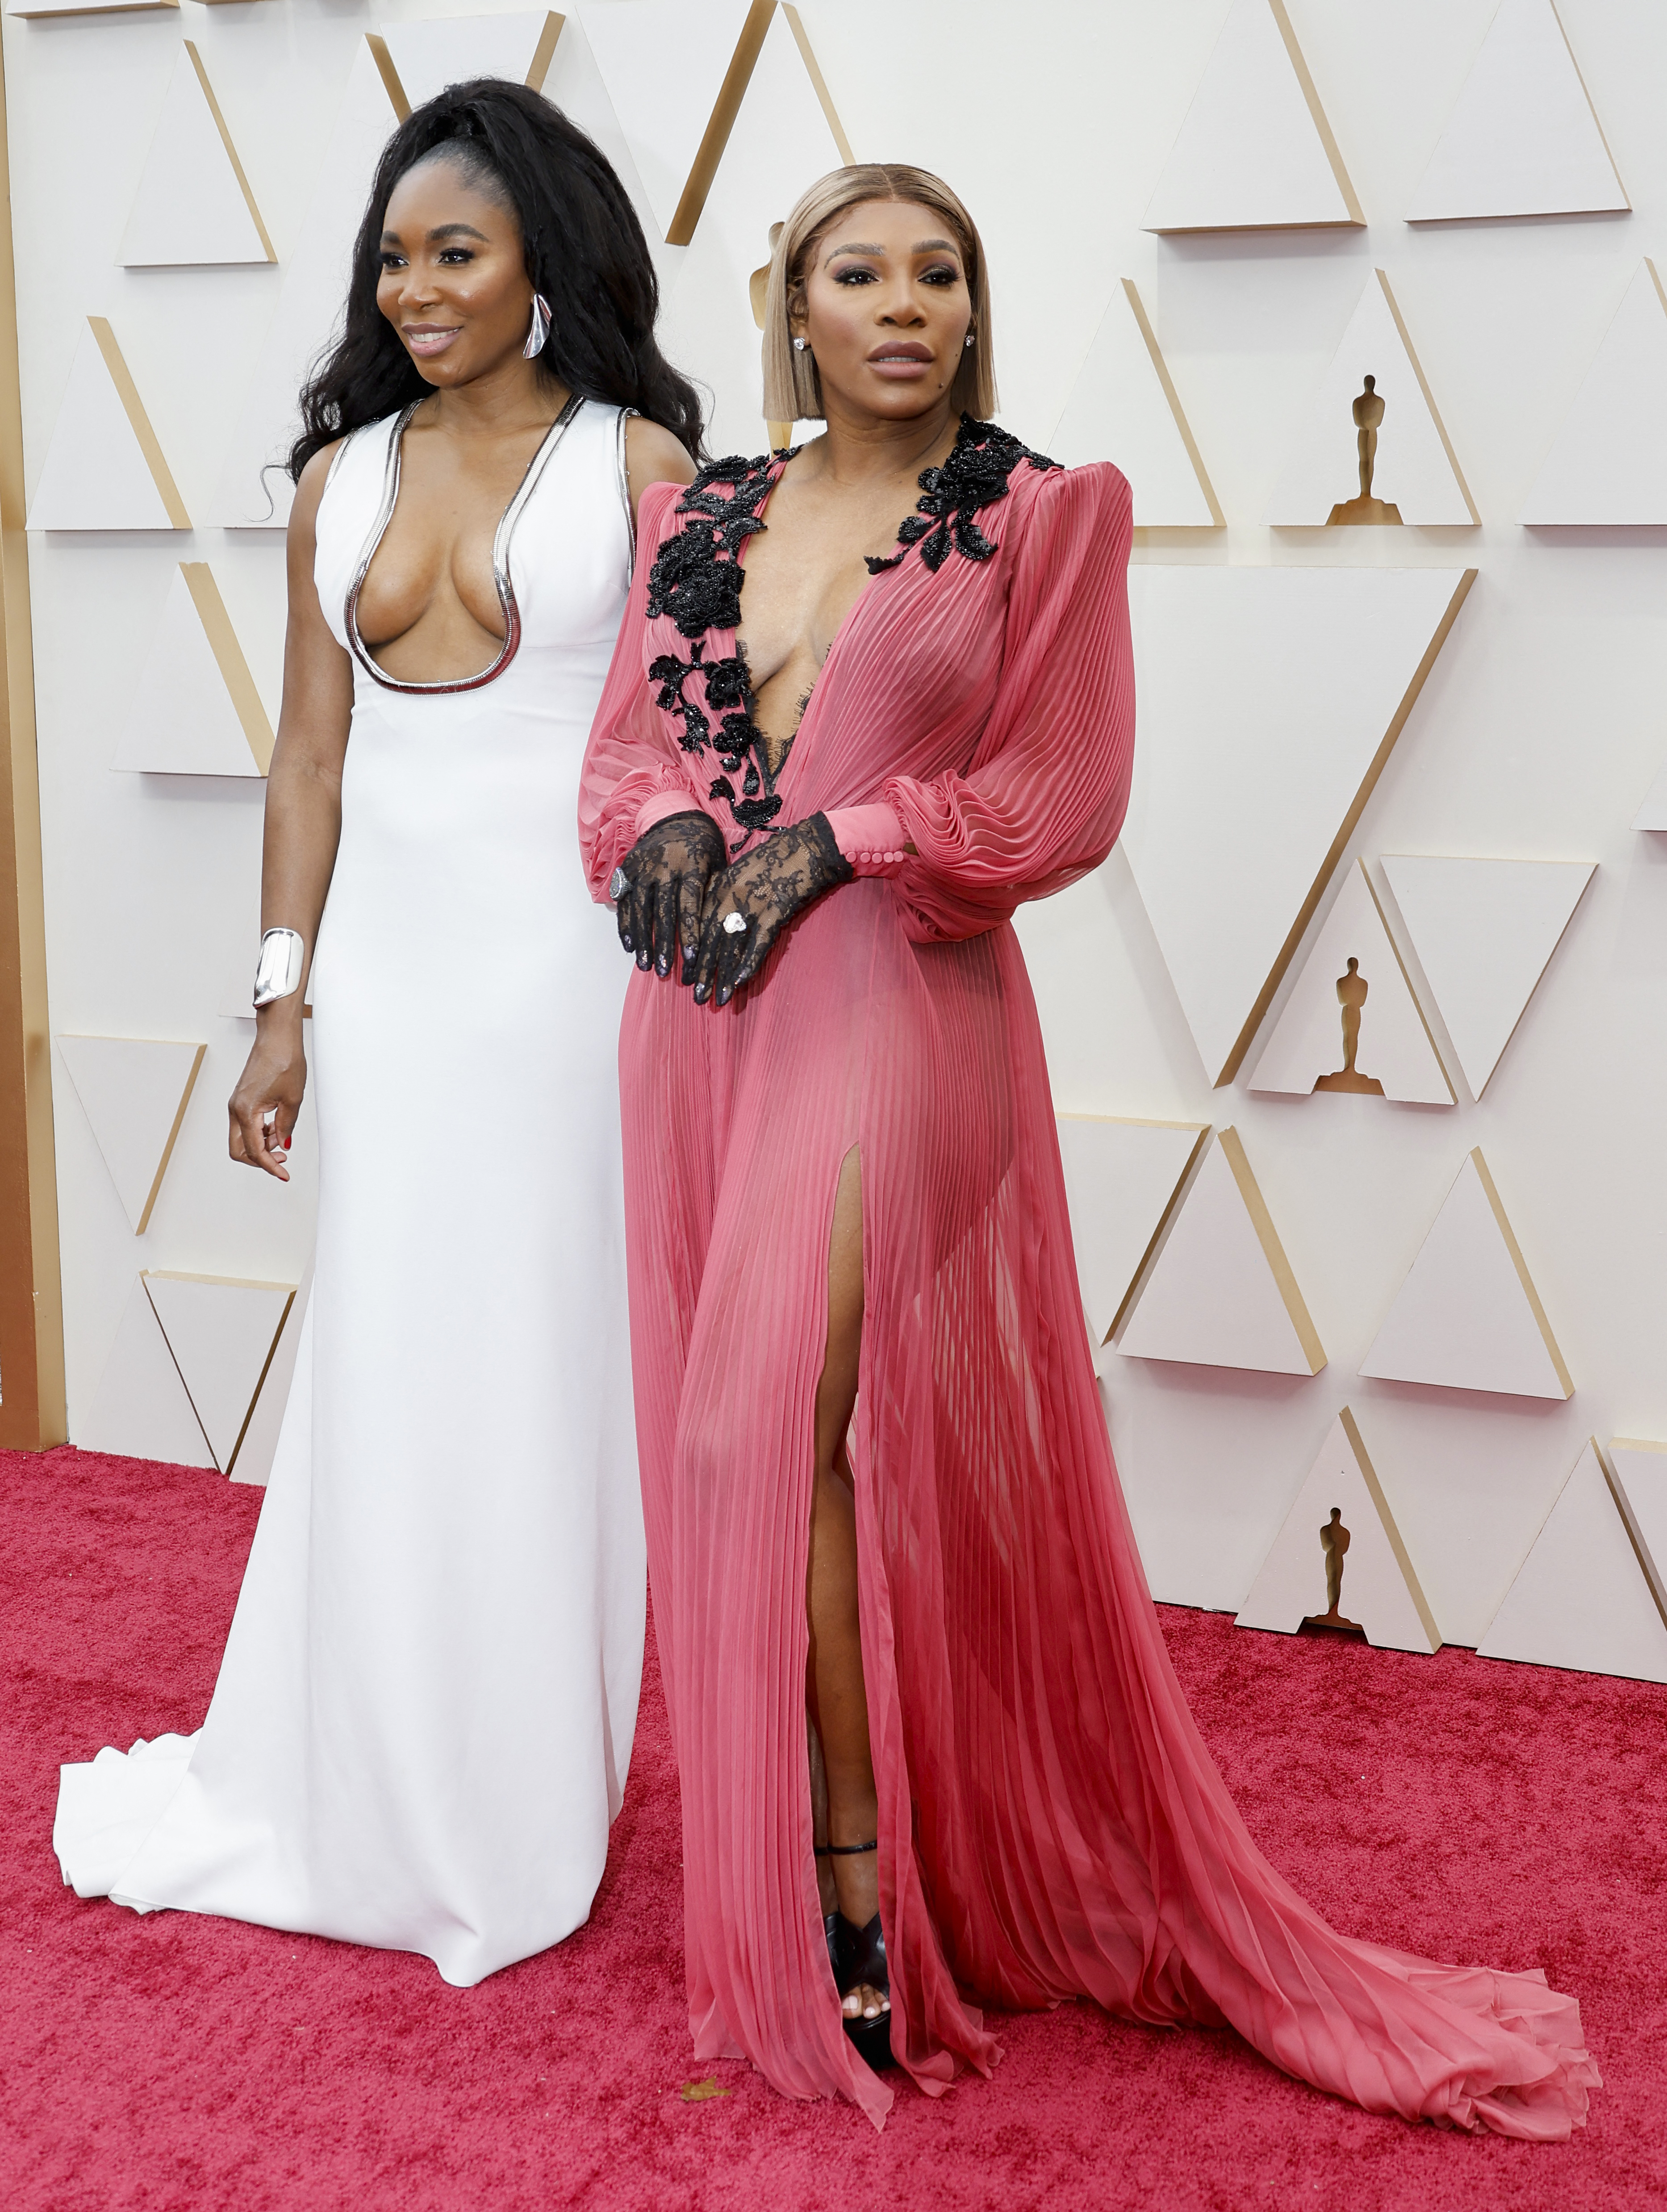 tennis players venus and serena williams pose on the red carpet. venus wears a white plunging gown, serena wears pink flowing 